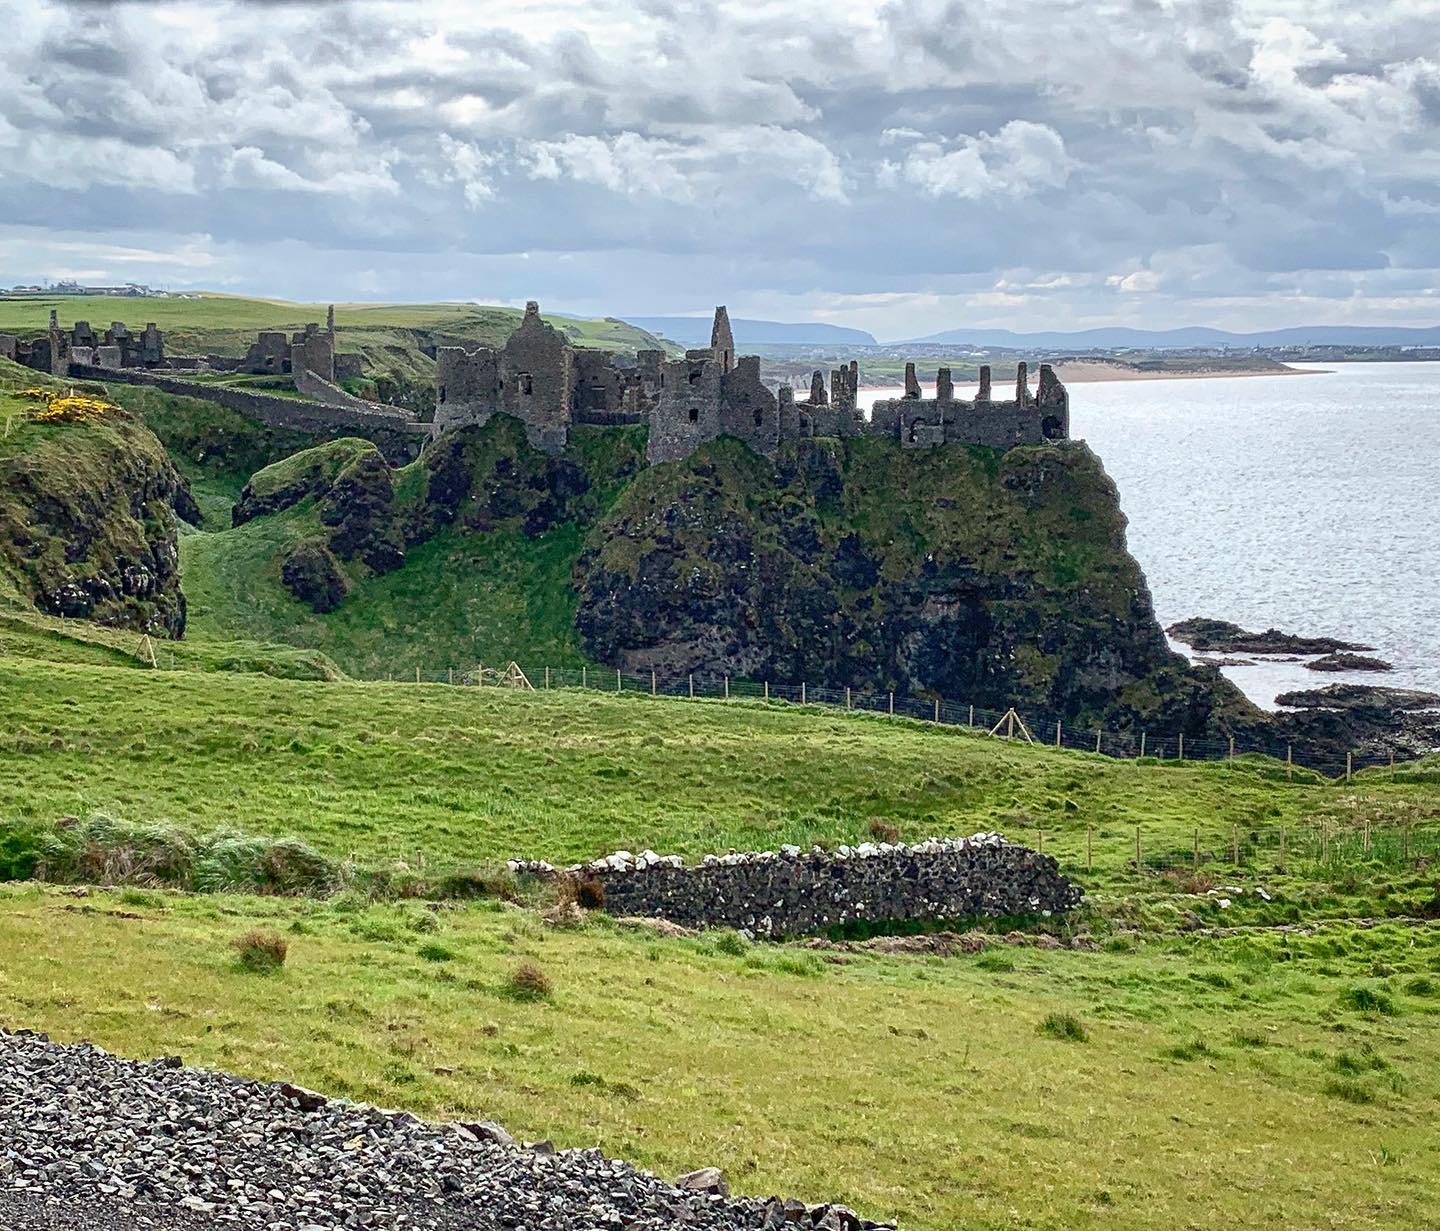 Dunluce Castle is a now-ruined medieval castle in Northern Ireland. It is located on the edge of a basalt outcropping in County Antrim, and is accessible via a bridge connecting it to the mainland. The castle is surrounded by extremely steep drops on either side, which may have been an important factor to the early Christians and Vikings who were drawn to this place where an early Irish fort once stood.
.
#dunlucecastle #ireland #travel #travelgram #travelgrams #travelphotography #travelblogger #traveller #travellers #travels #traveler #travelers #beautiful #wonderful_places #reisen #irish #bestirelandpics #atlanticocean #atlantic #sea